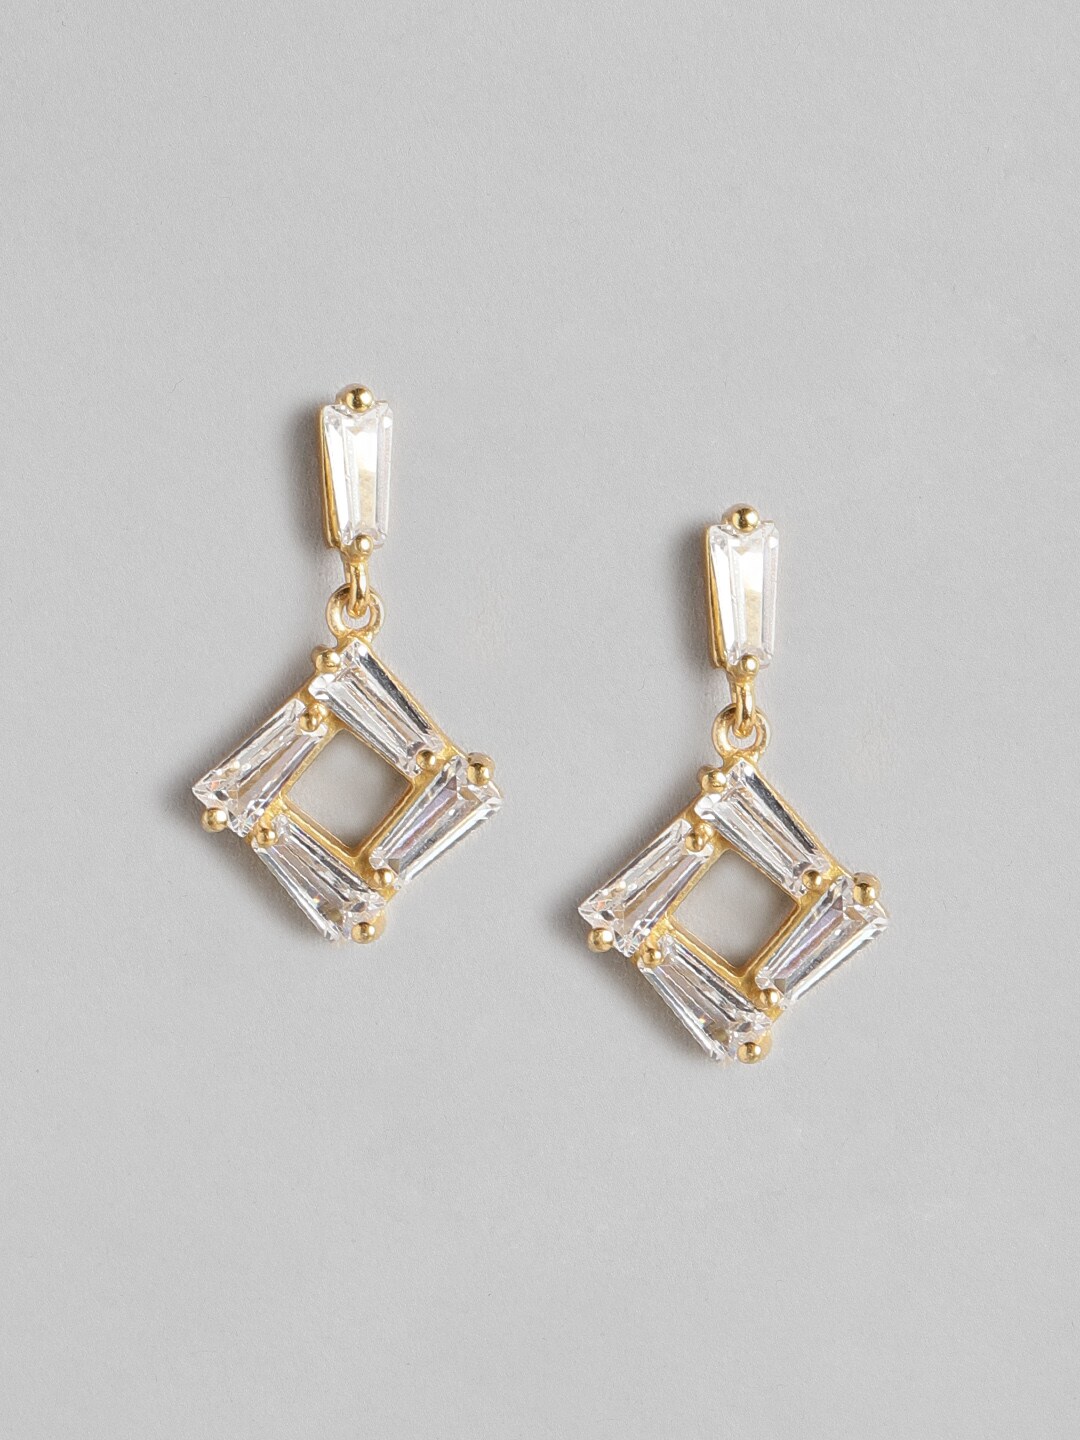 Carlton London Gold-Plated & White Square Drop Earrings Price in India